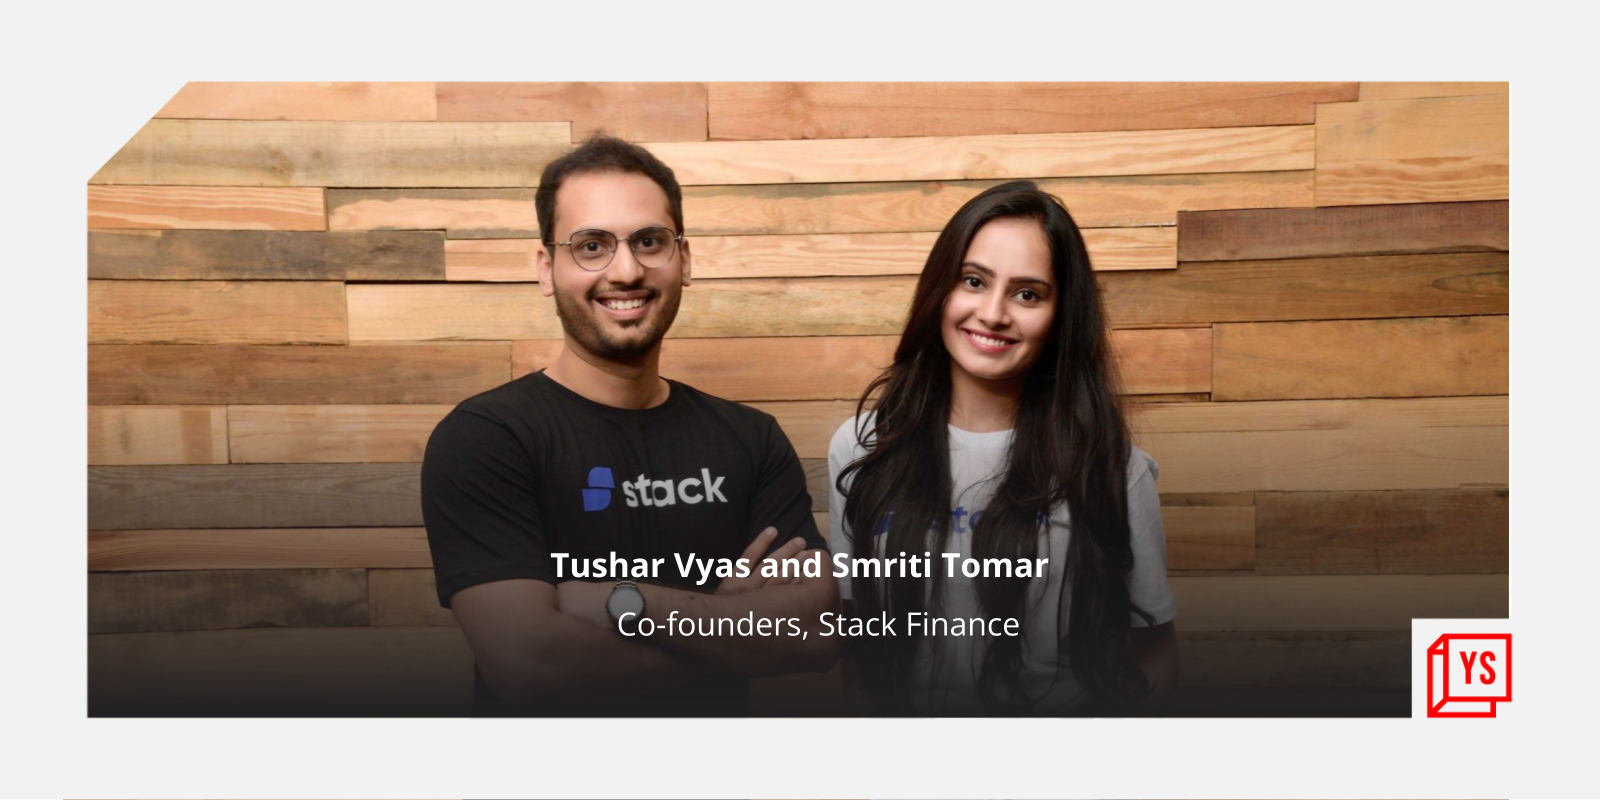 Tailored for retail investors, this fintech startup’s app helps declutter investments